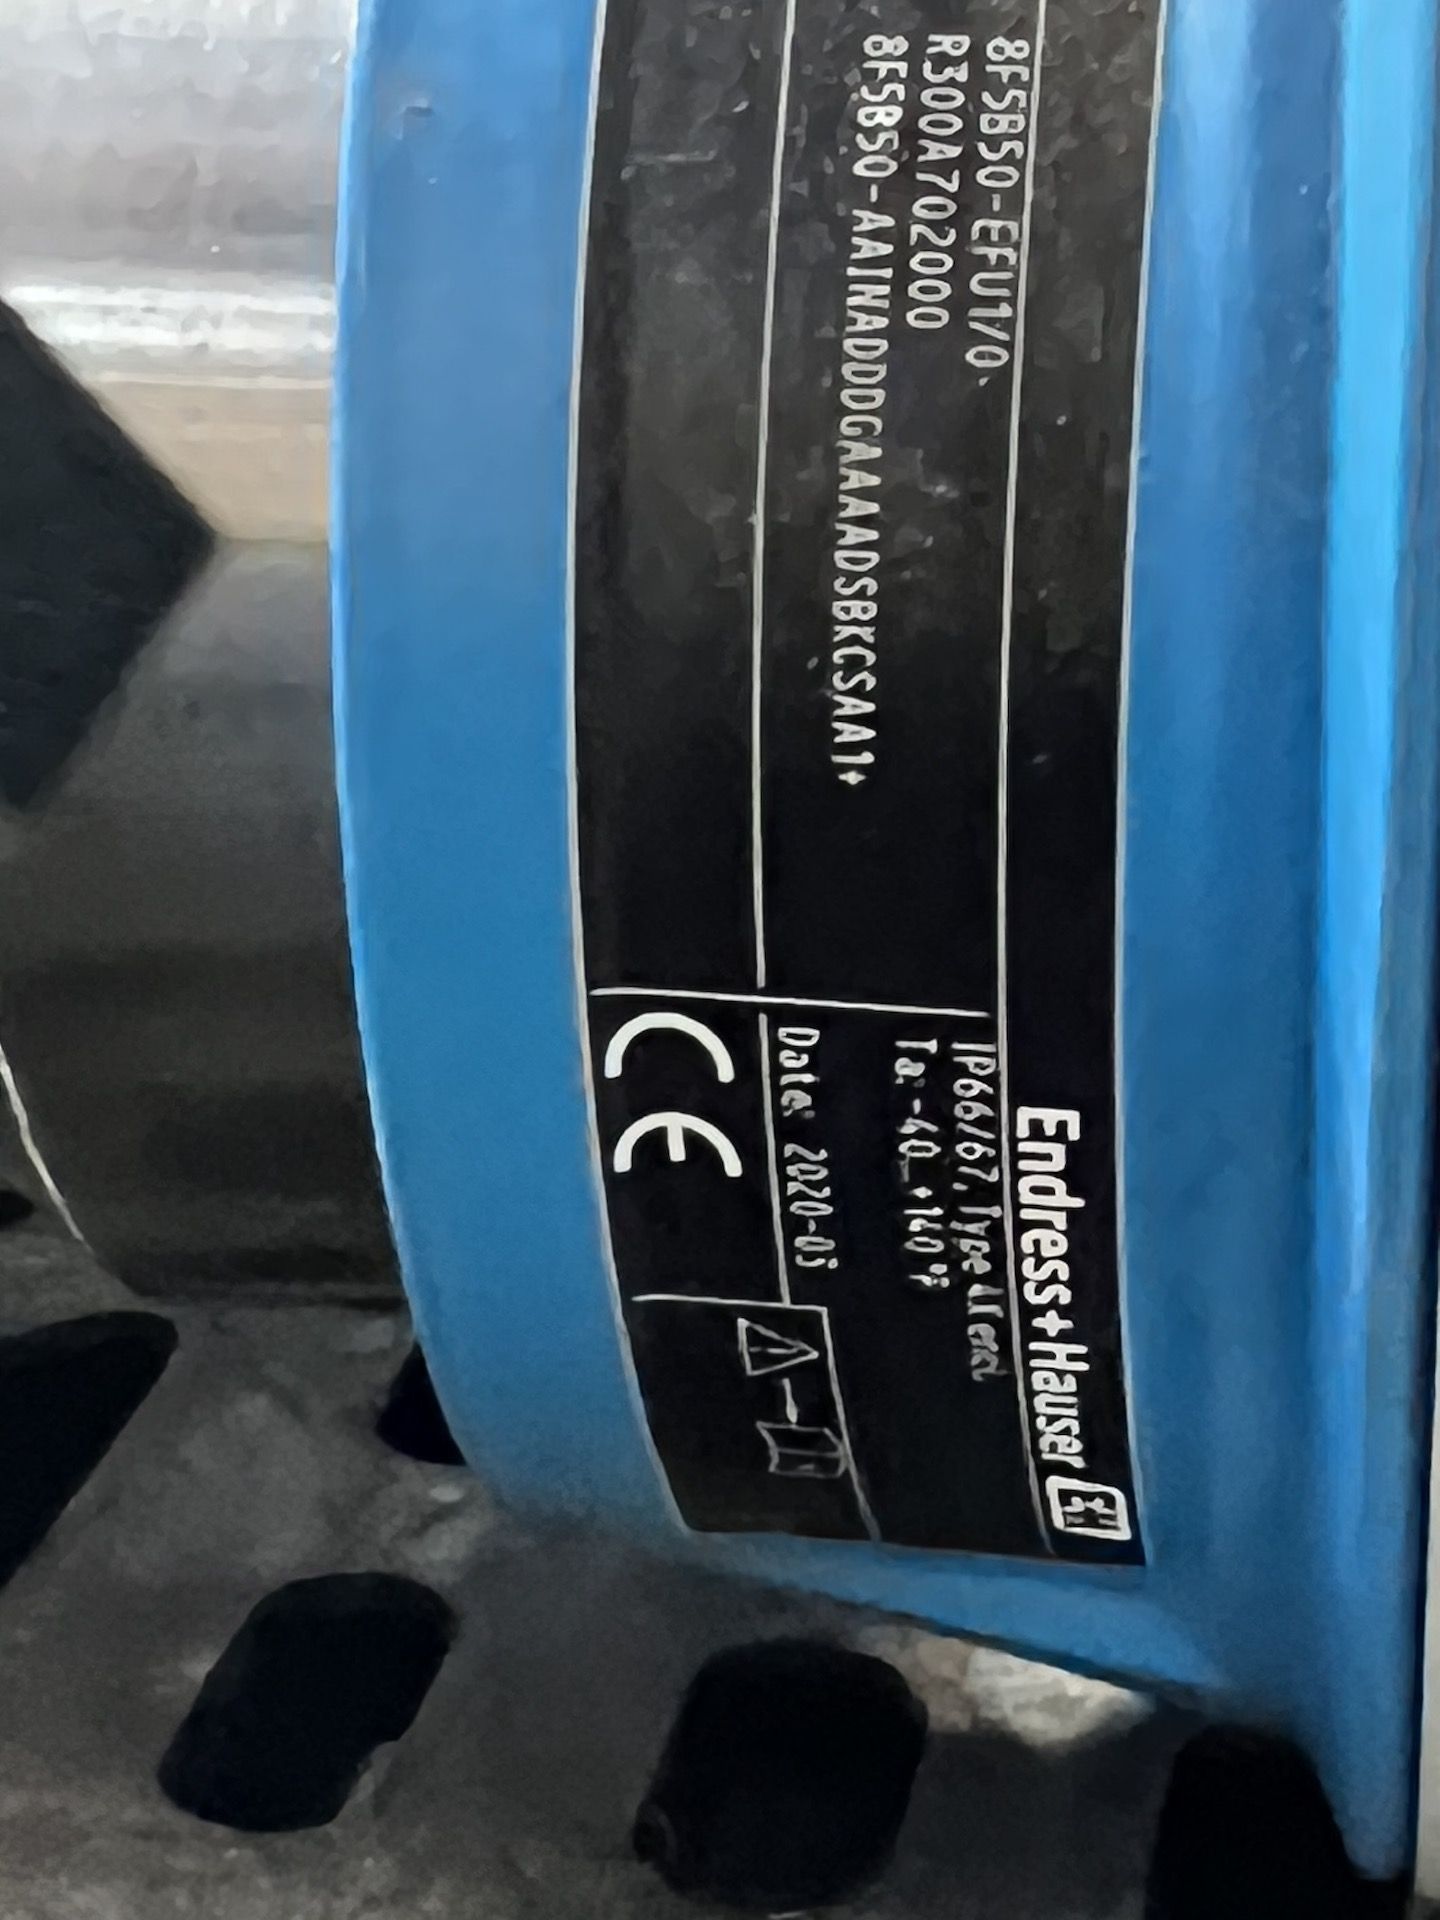 ENDRESS HAUSER FLOW METER, MODEL PROMASS F, S/N R300A702000 - Image 5 of 5